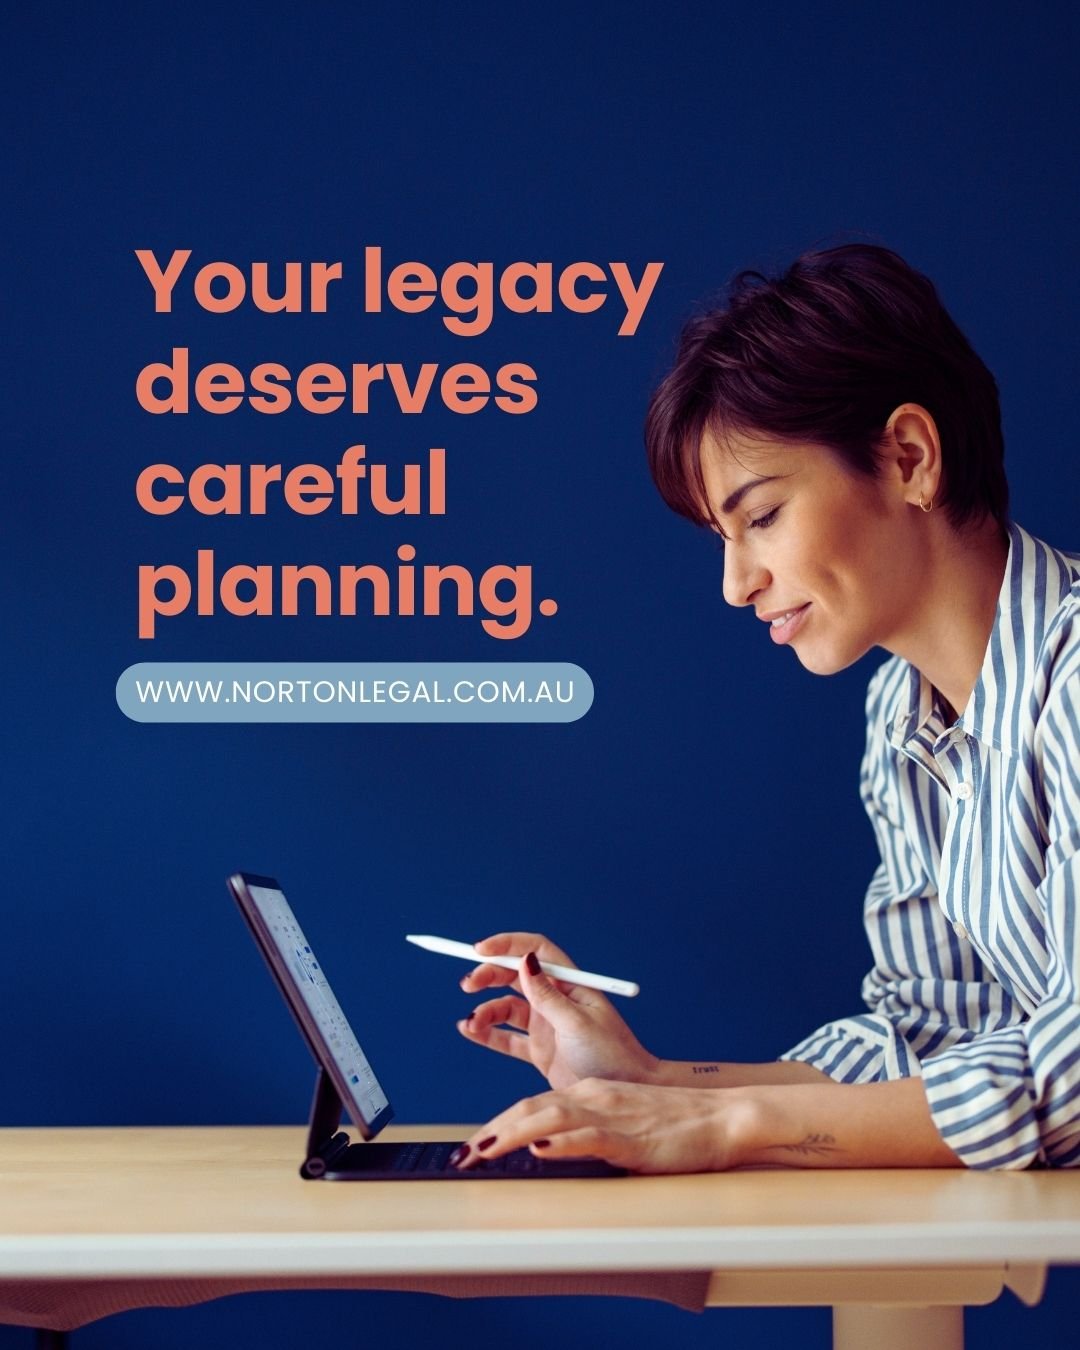 Your legacy deserves careful planning. 💯
Norton Legal offers comprehensive estate planning services to ensure your assets are distributed according to your wishes. 
Let us help you protect what matters most. 
Contact us now to start planning. 
Link 